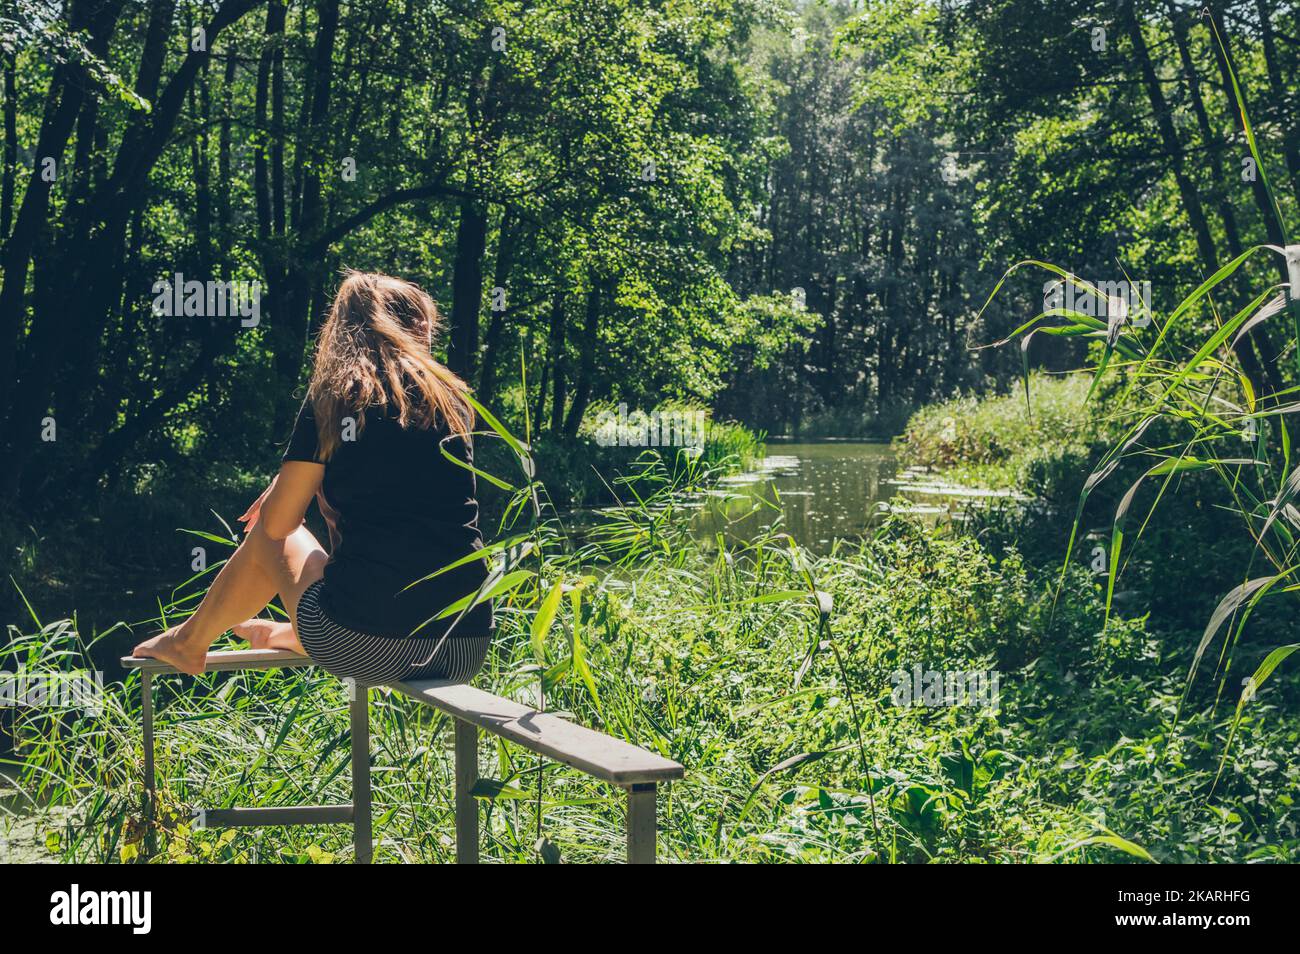 Woman sitting and enjoying sun and forest landscape Stock Photo